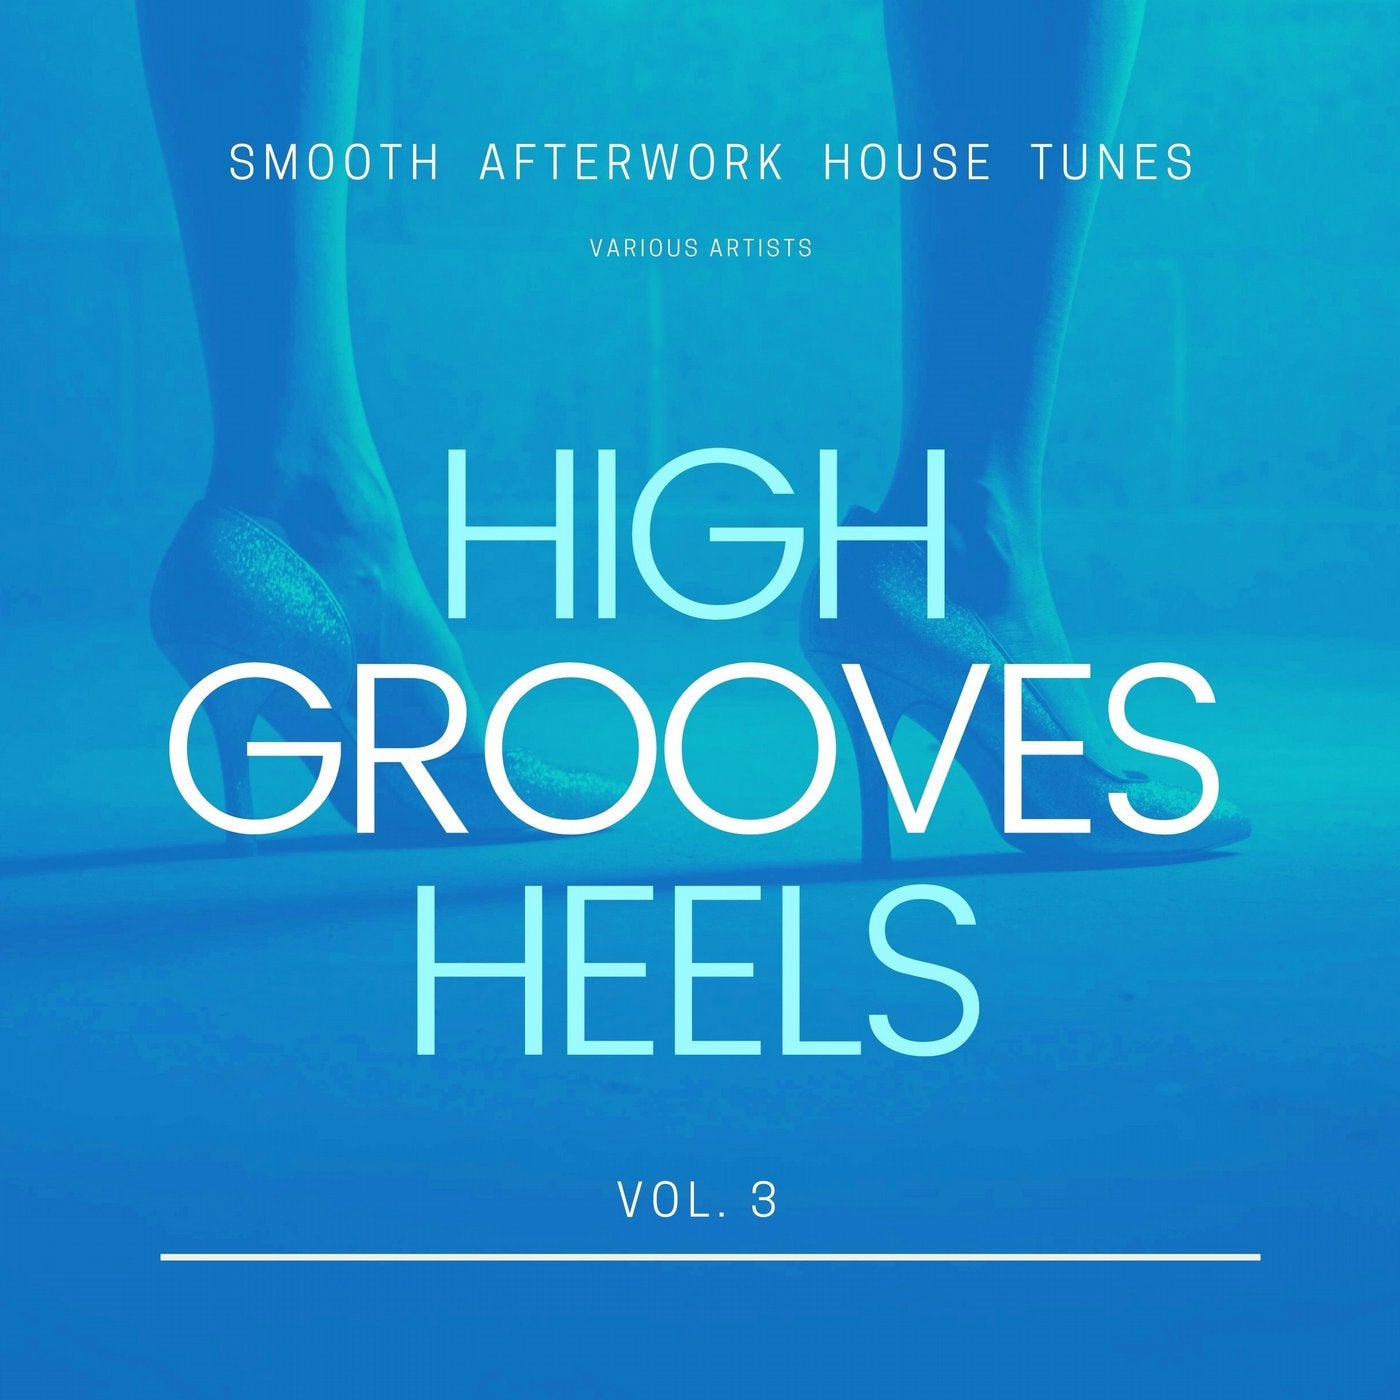 High Heels Grooves (Smooth Afterwork House Tunes), Vol. 3